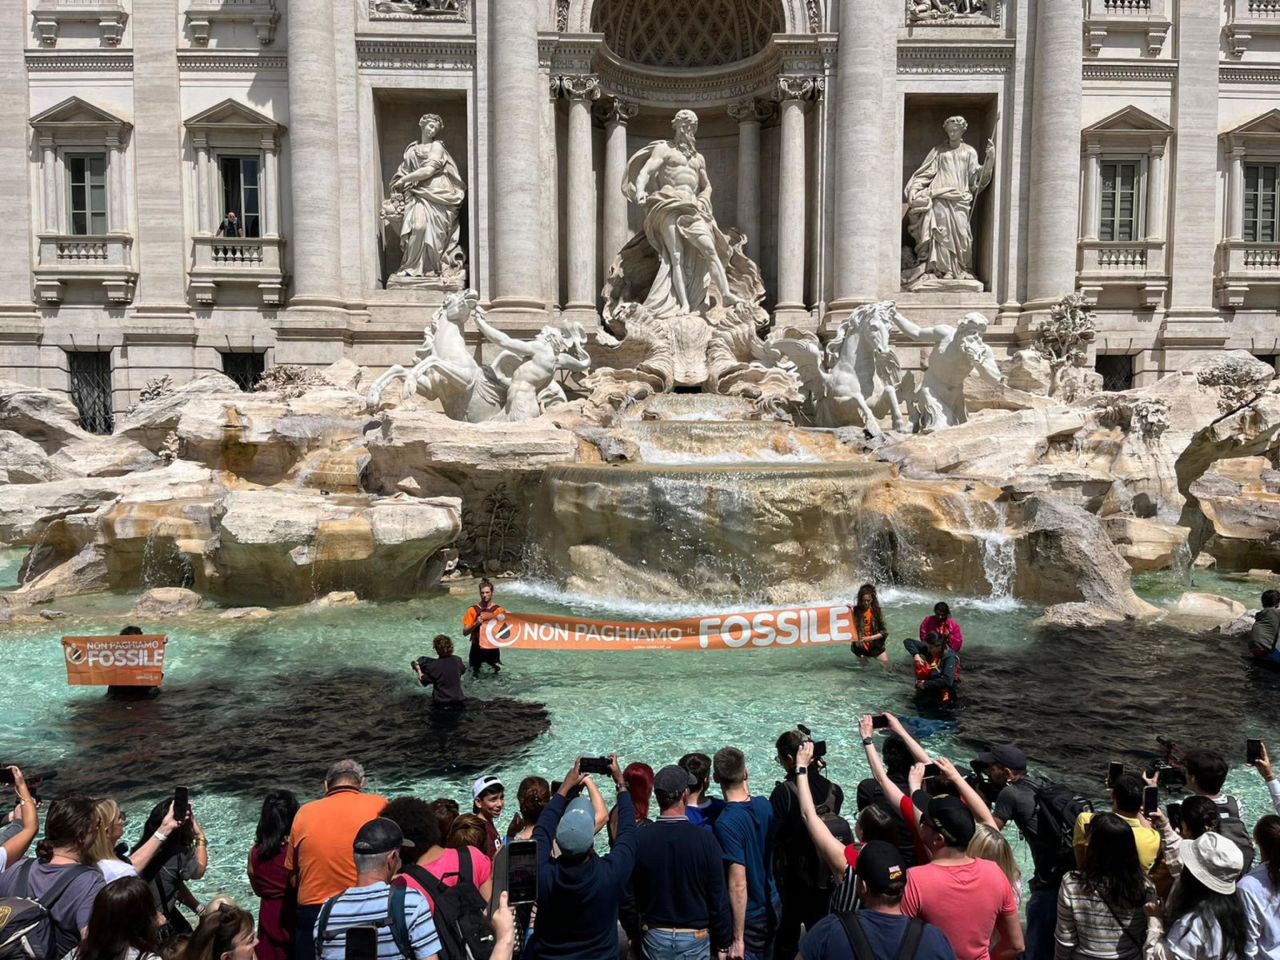 Climate activists from the group Last Generation stand inside the Trevi Fountain in Rome.